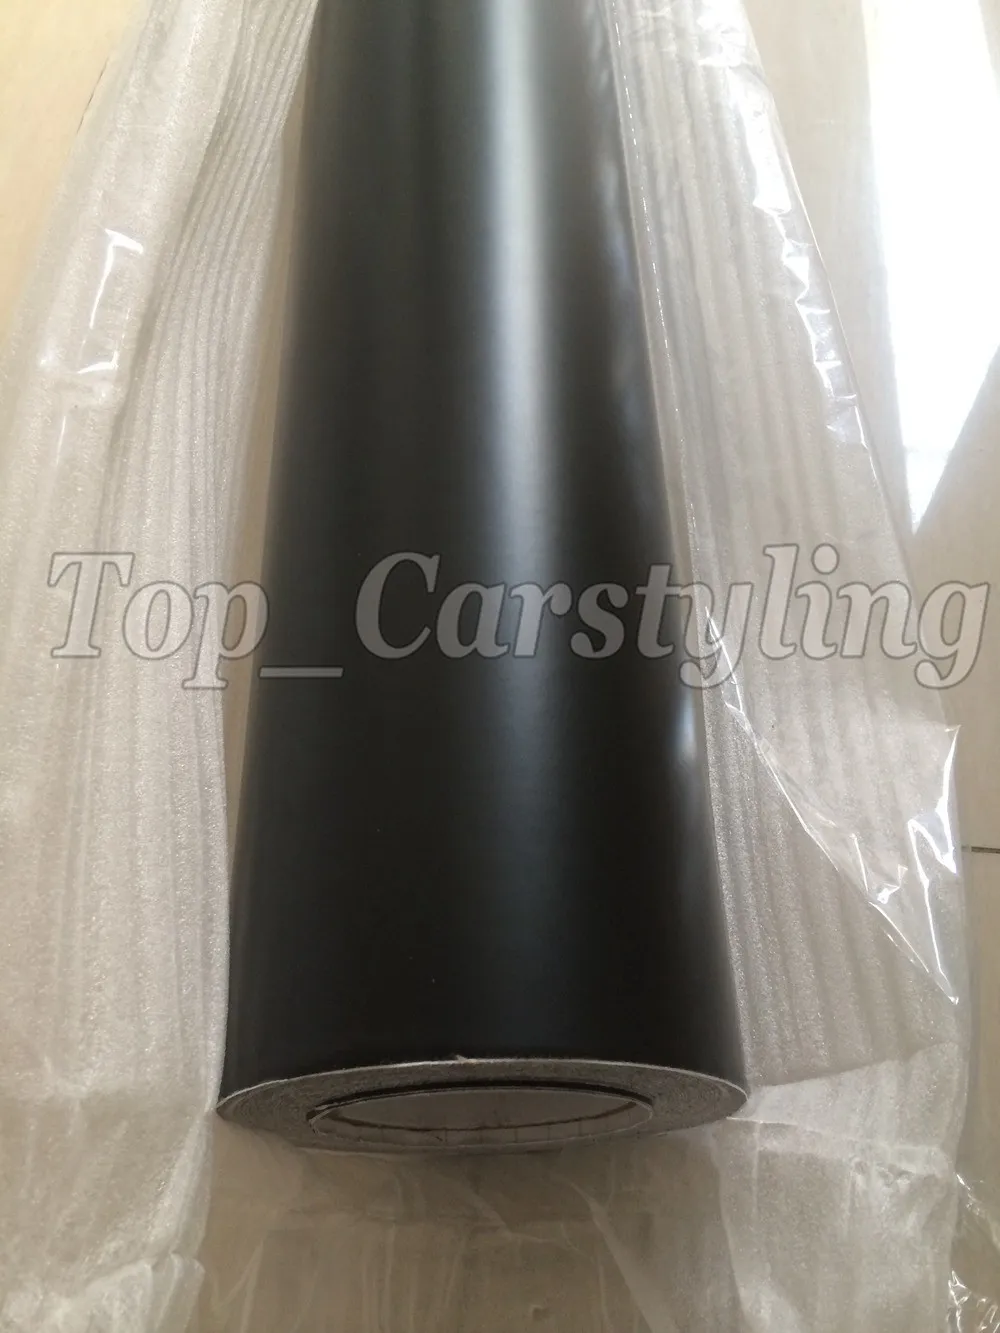 Premium Matte Black Satin Vinyl Matte Black Hood Wrap Film With Air Release  3M Roll 5ftx98ft For Vehicle Wrapping And Covering From Top_carstyling,  $156.79